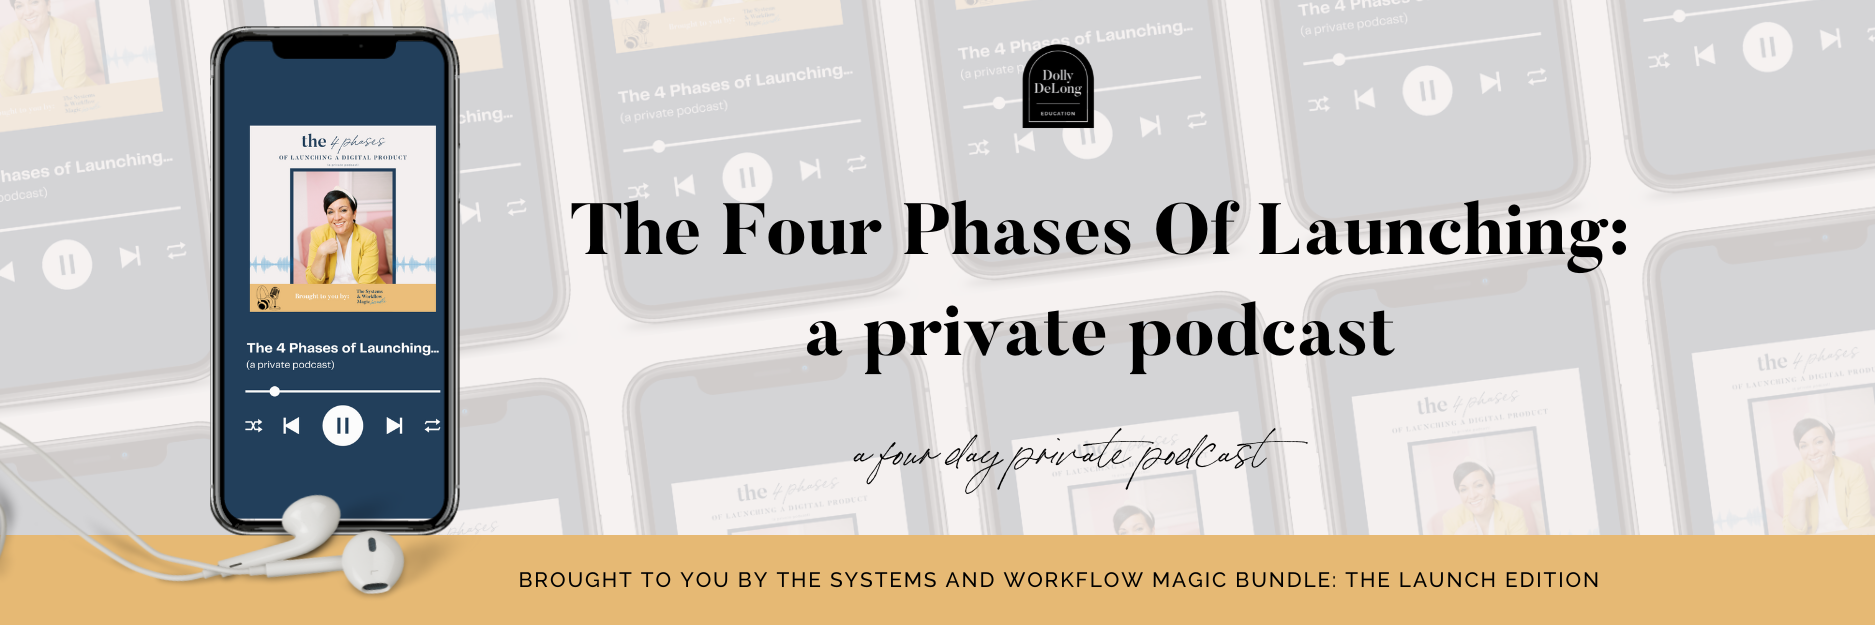 the_four_phases_of_launching_a_digital_product_a_private_podcast